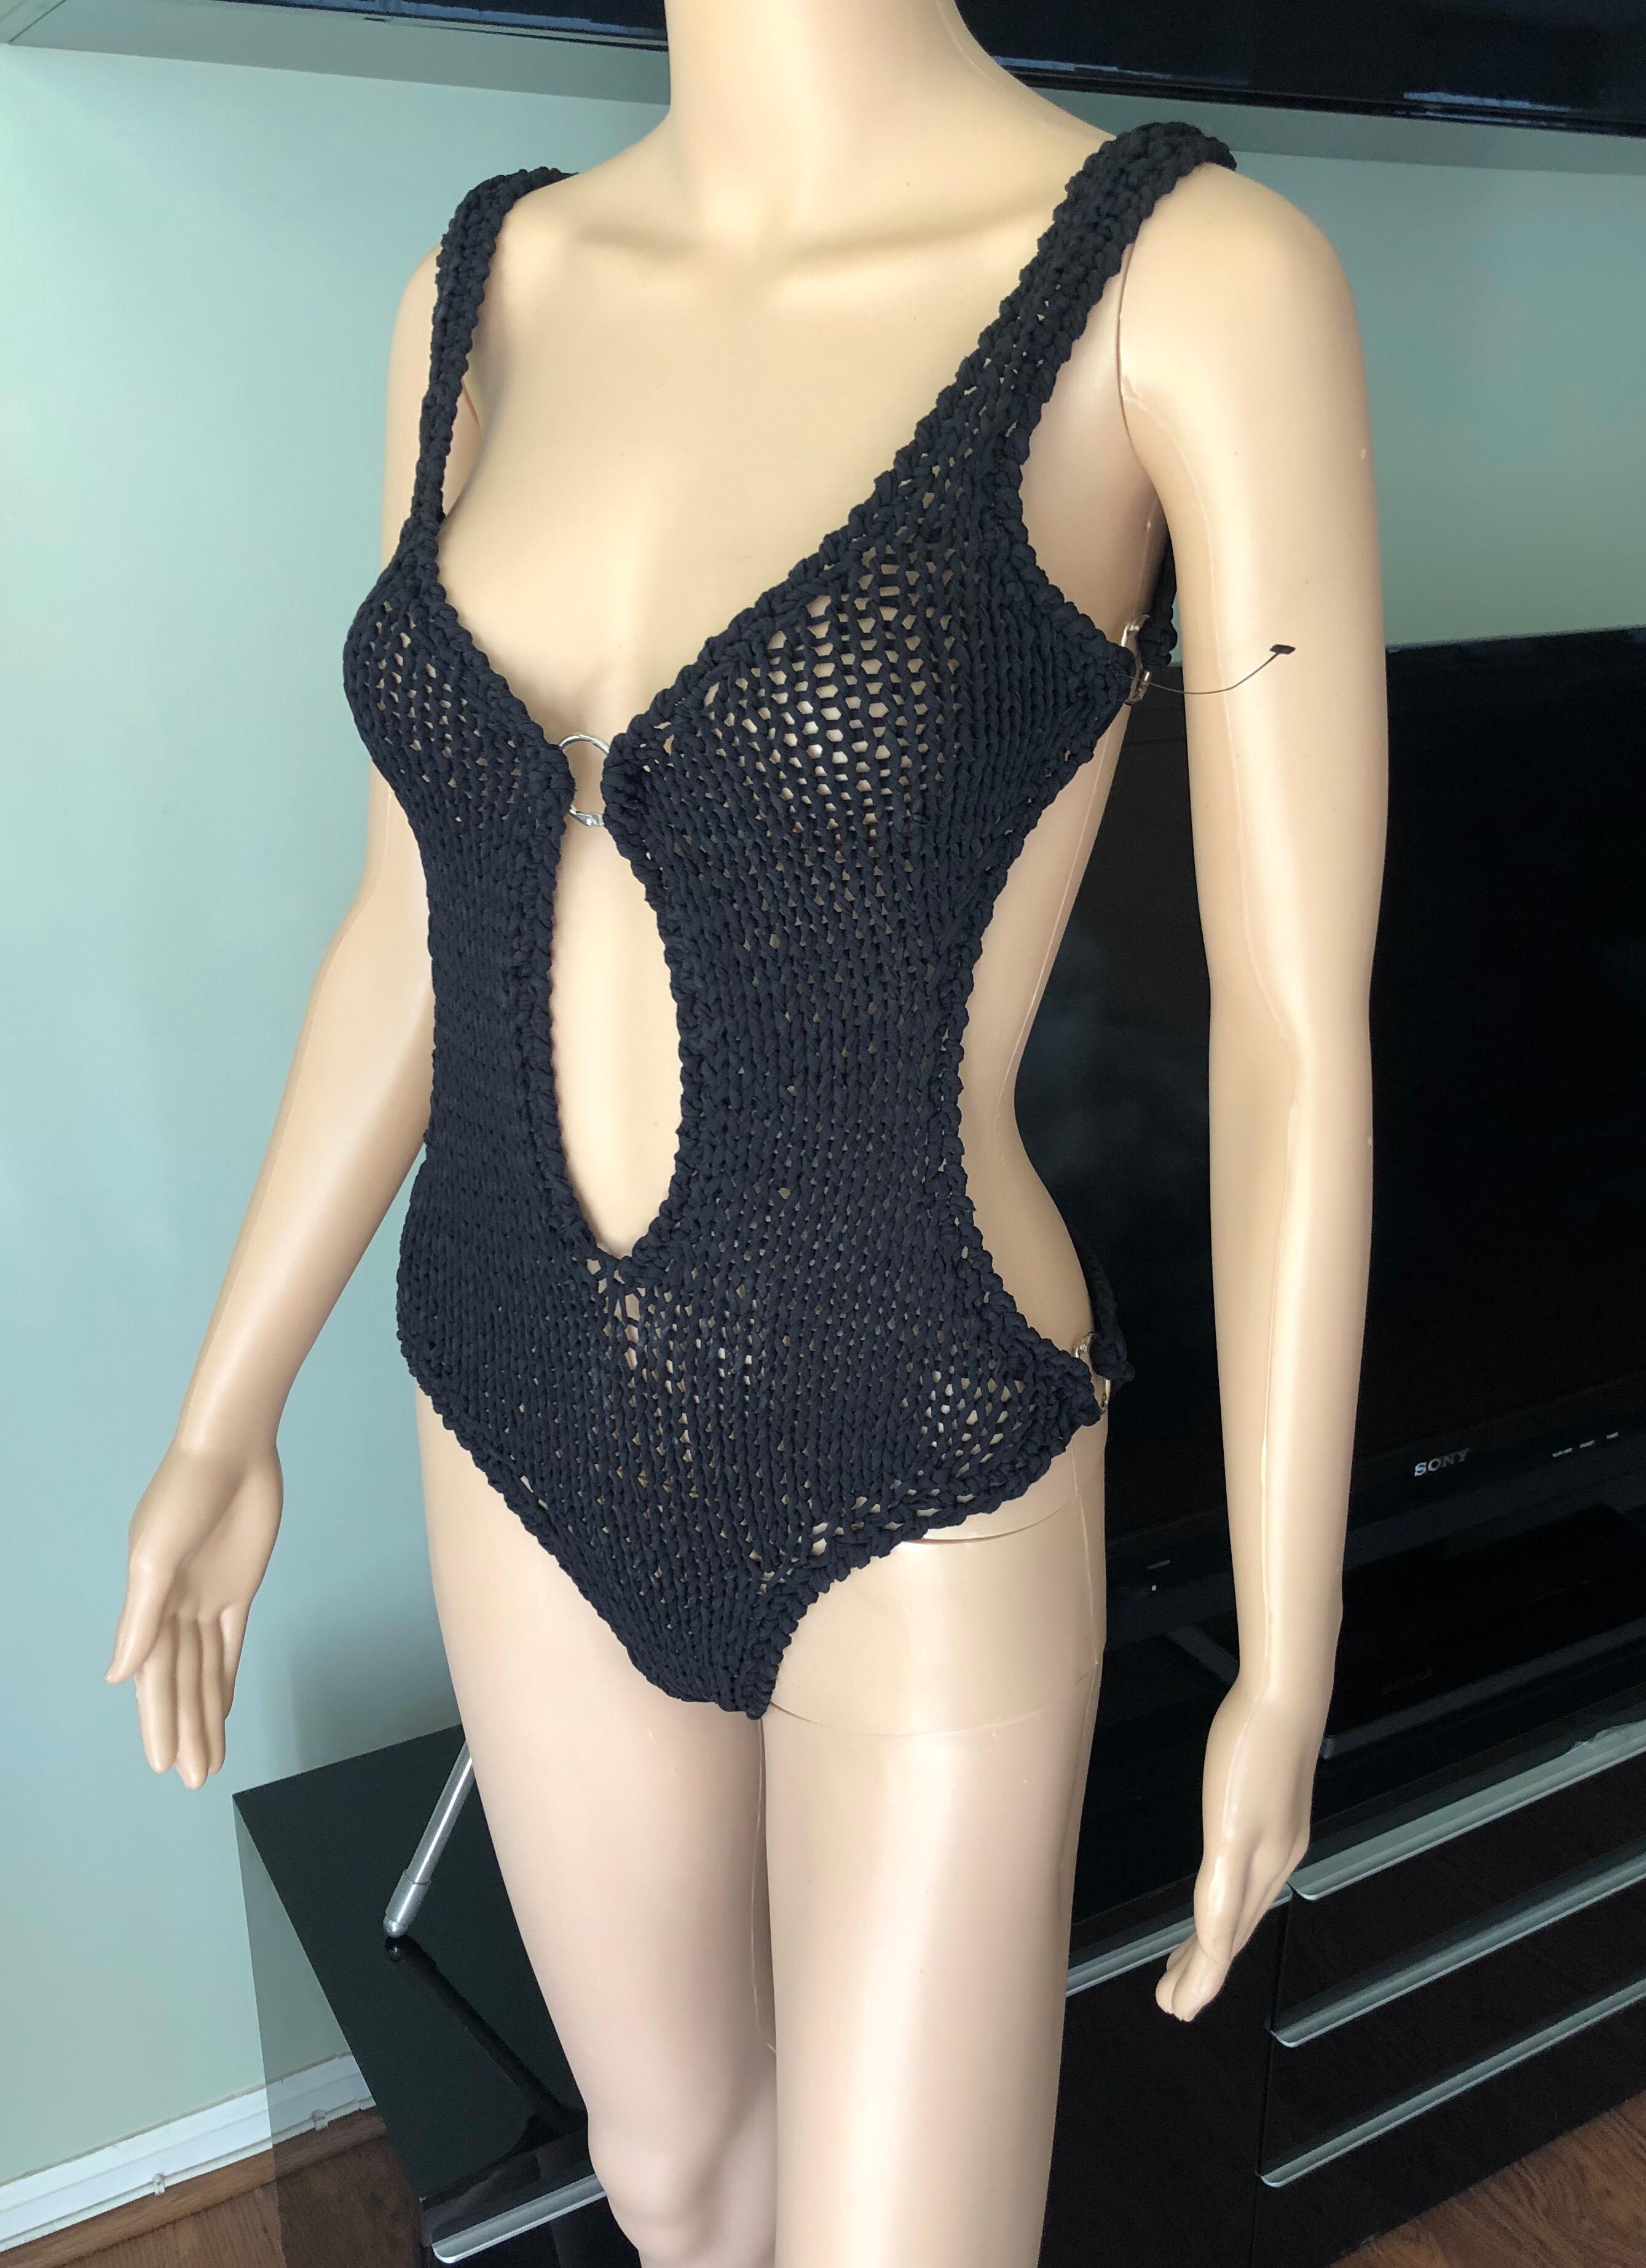 Tom Ford for Gucci S/S 1995 Runway Cutout Knit Woven Black One-Piece Bodysuit Swimsuit IT 42

Gucci knitted woven one-piece swimsuit featuring plunging neckline, cutout accents and open back.
